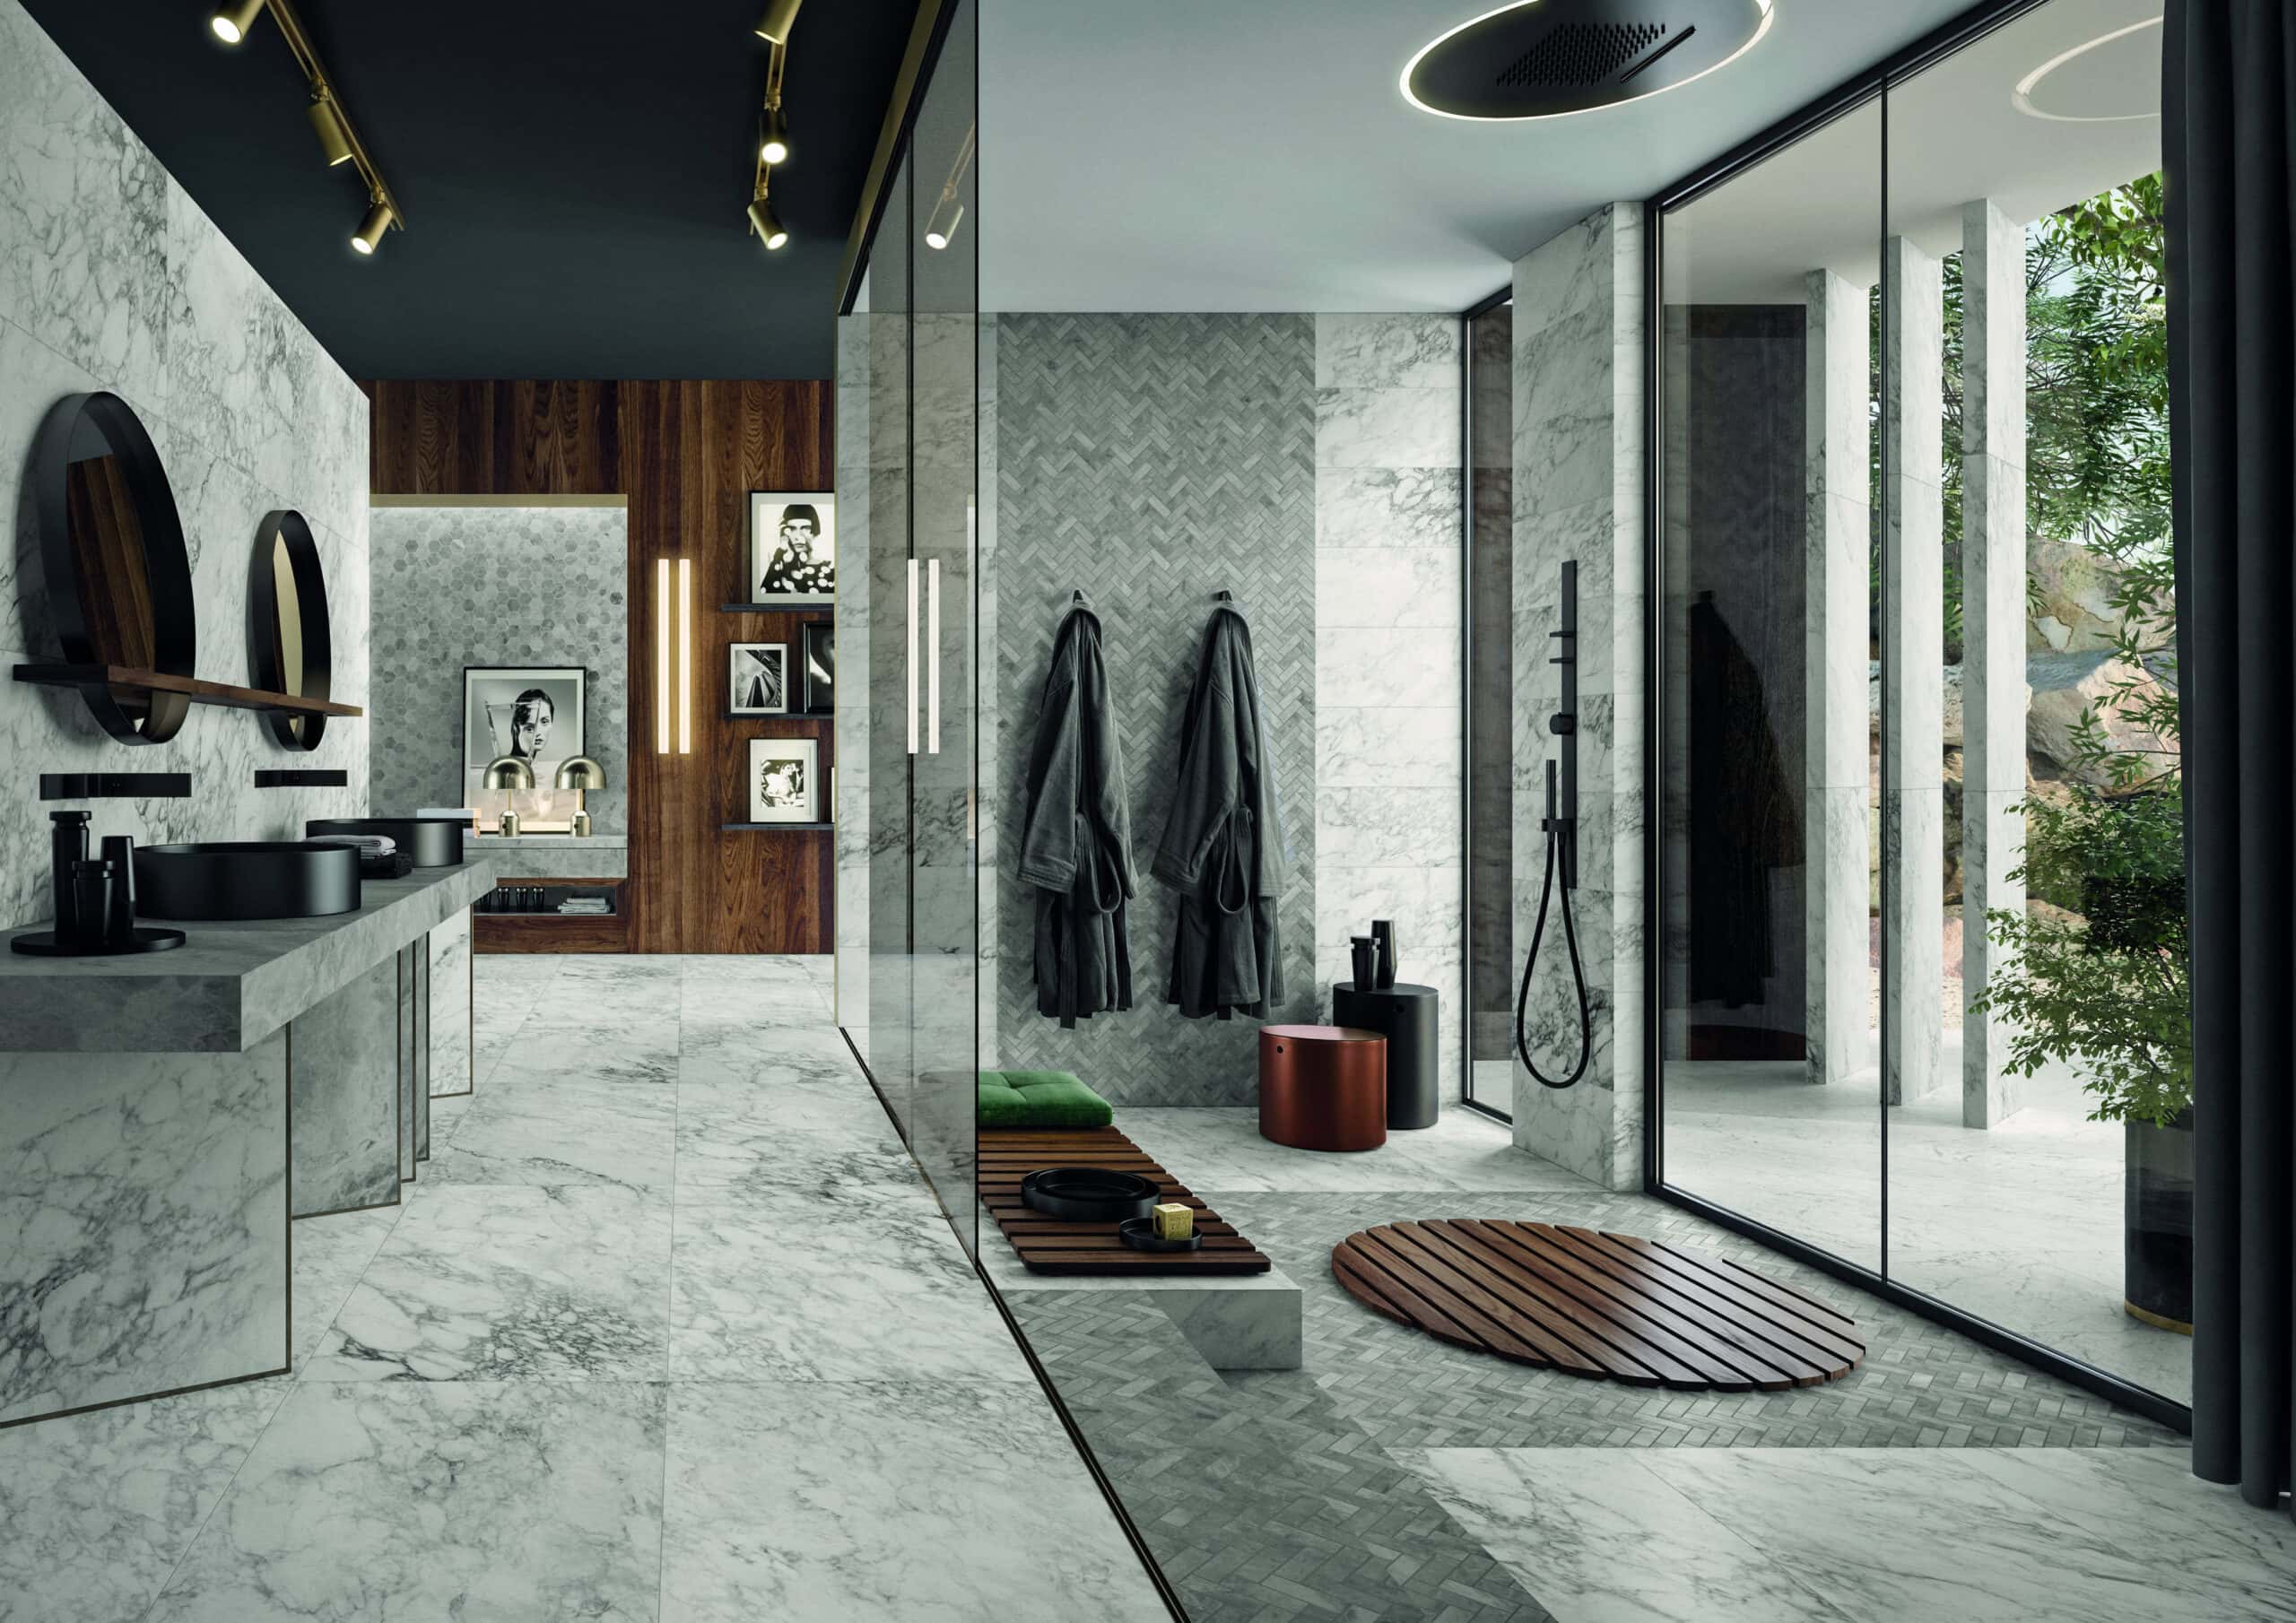 Image of a bathroom with white and gray marble-look tile